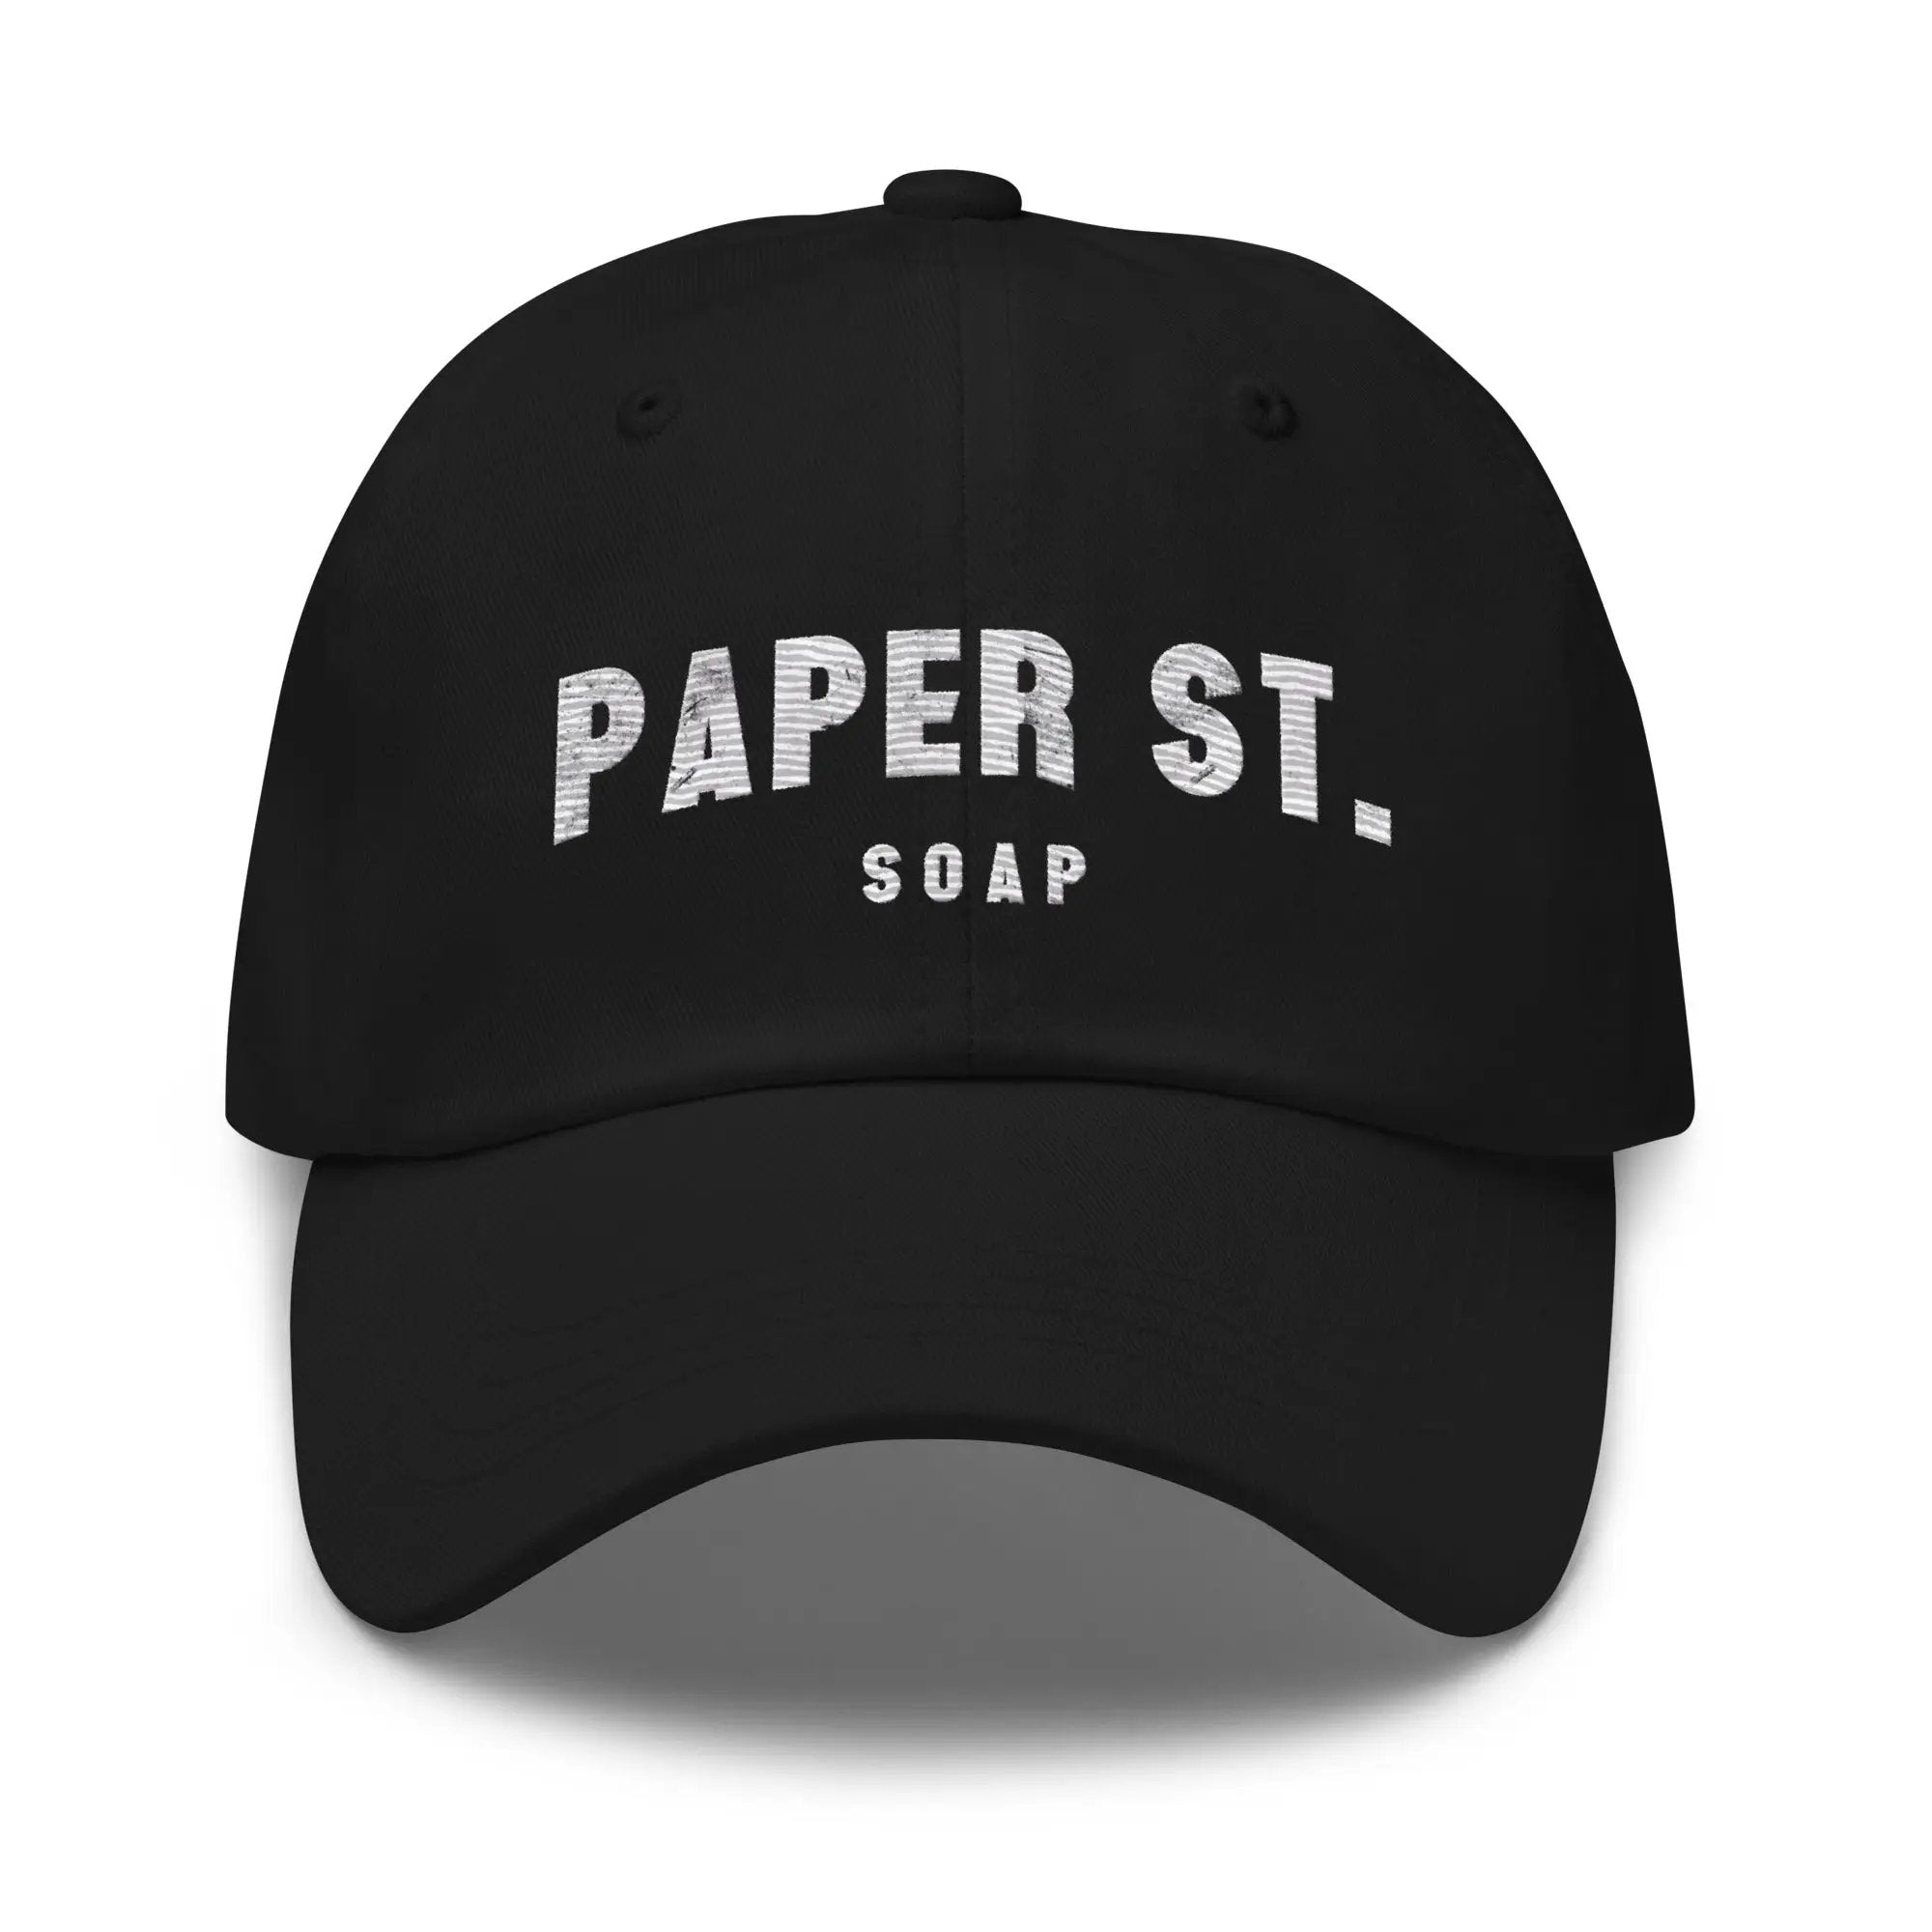 a black hat with a white paper st logo on it